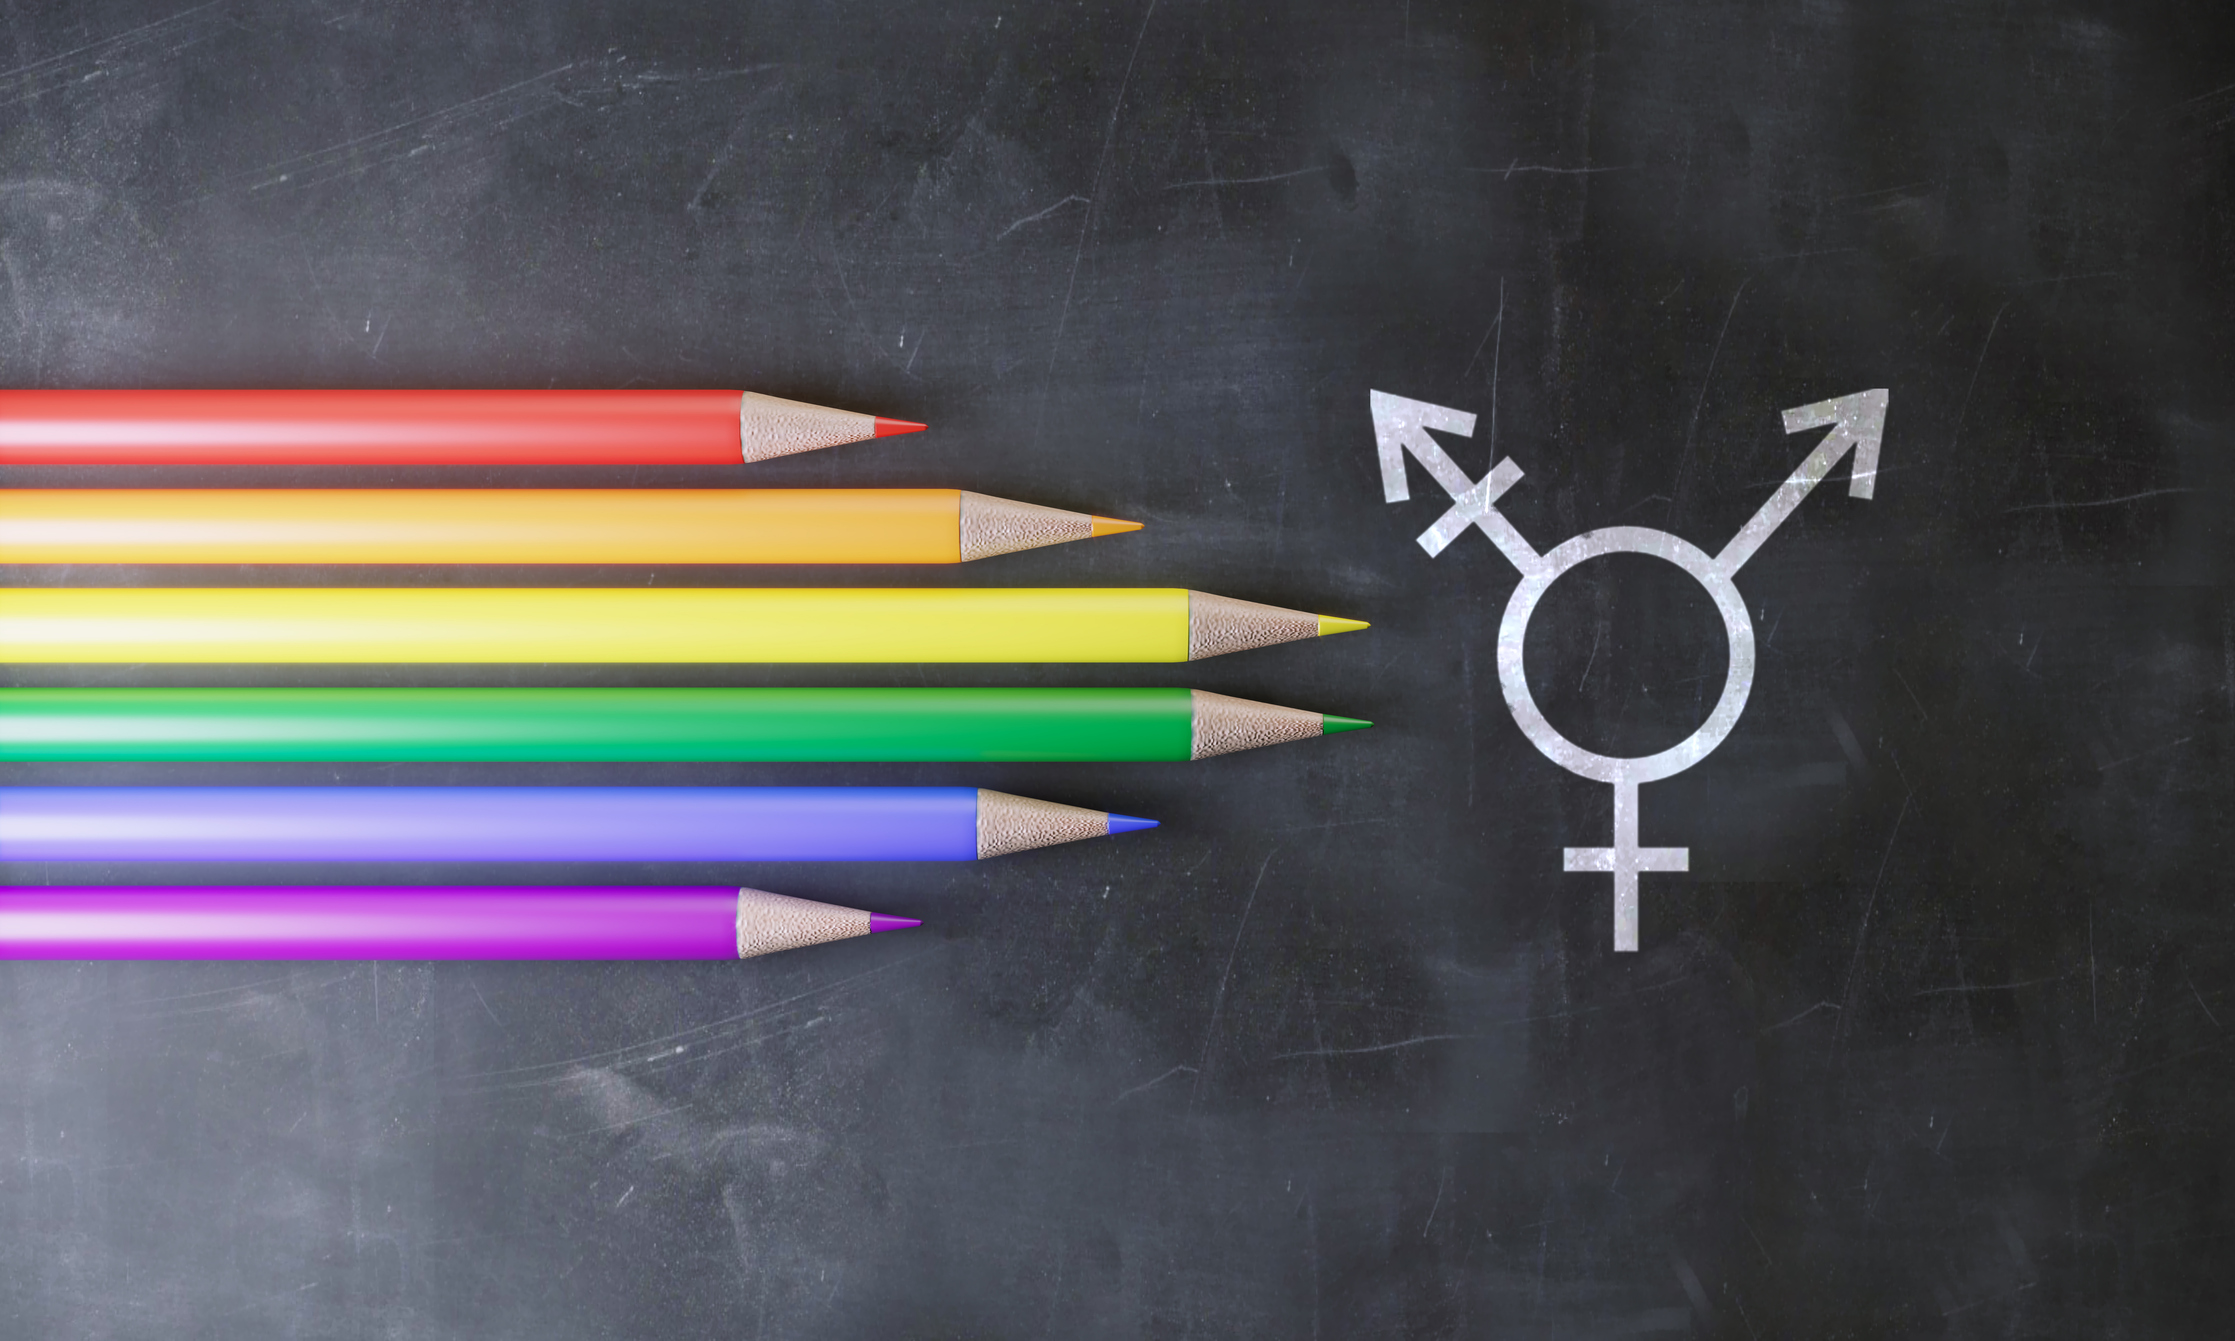 School acknowledges survey on student sexuality without parental consent